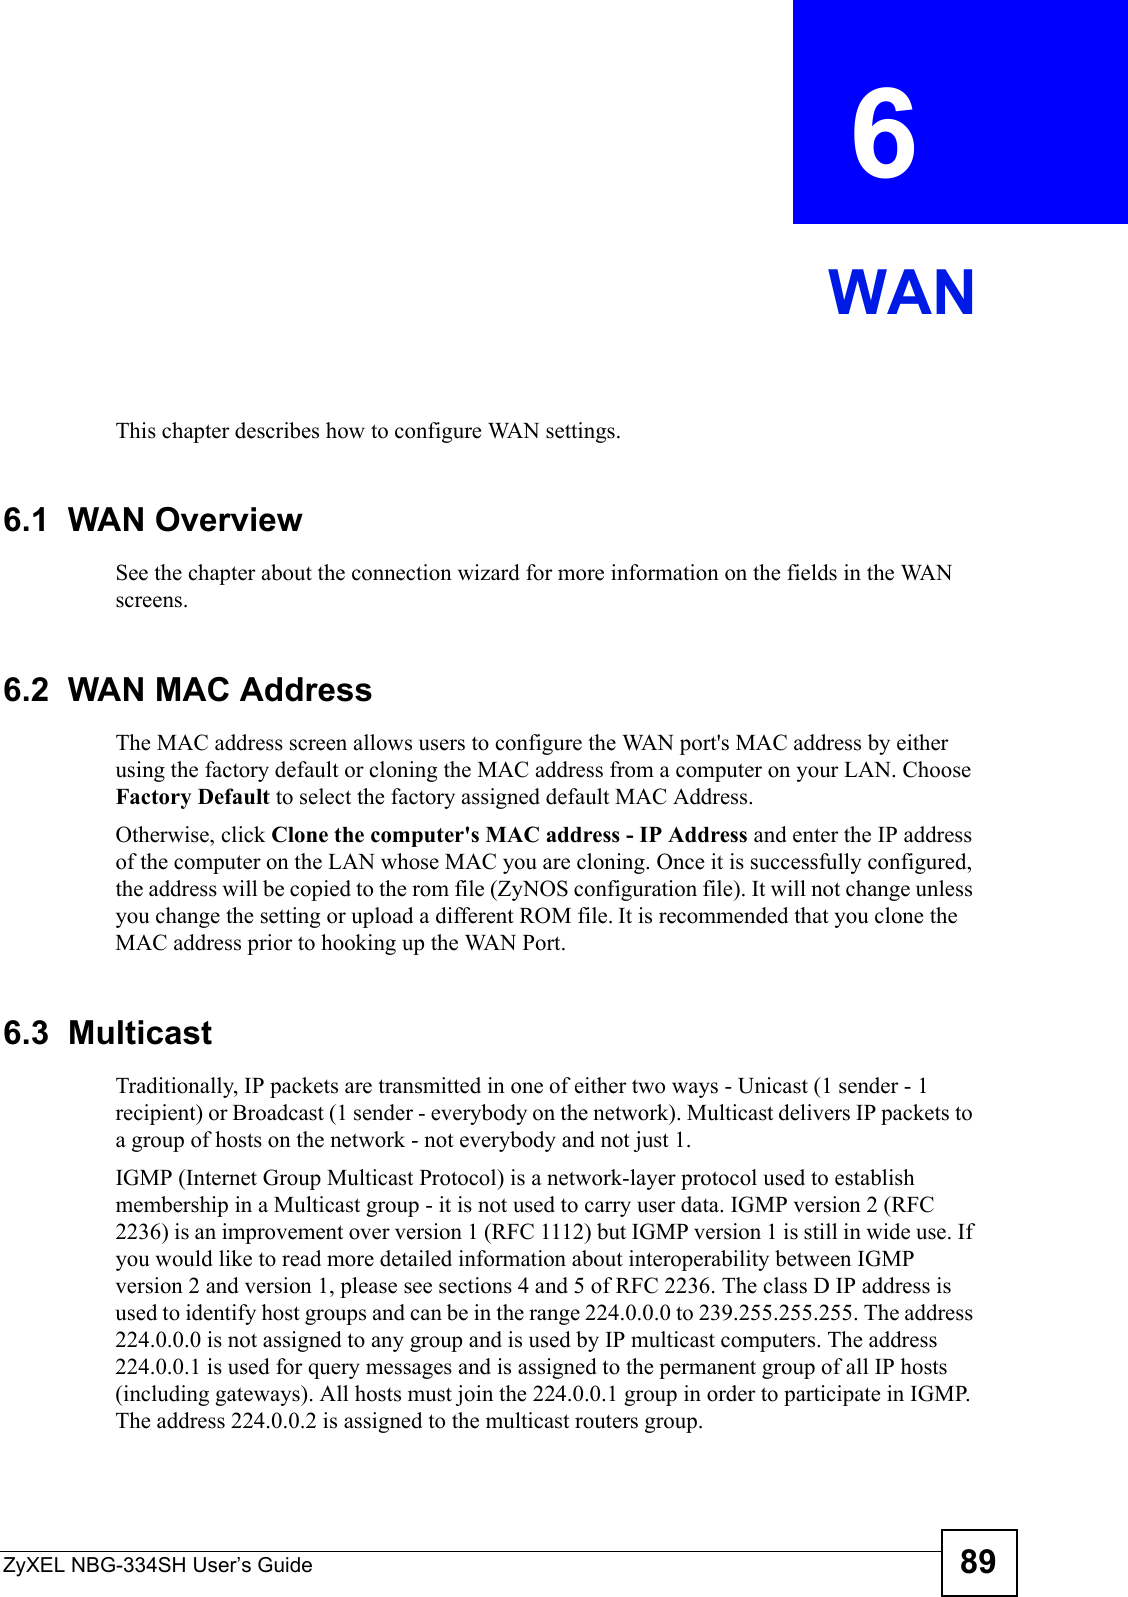 ZyXEL NBG-334SH User’s Guide 89CHAPTER  6 WANThis chapter describes how to configure WAN settings.6.1  WAN OverviewSee the chapter about the connection wizard for more information on the fields in the WAN screens.6.2  WAN MAC AddressThe MAC address screen allows users to configure the WAN port&apos;s MAC address by either using the factory default or cloning the MAC address from a computer on your LAN. Choose Factory Default to select the factory assigned default MAC Address.Otherwise, click Clone the computer&apos;s MAC address - IP Address and enter the IP address of the computer on the LAN whose MAC you are cloning. Once it is successfully configured, the address will be copied to the rom file (ZyNOS configuration file). It will not change unless you change the setting or upload a different ROM file. It is recommended that you clone the MAC address prior to hooking up the WAN Port.6.3  MulticastTraditionally, IP packets are transmitted in one of either two ways - Unicast (1 sender - 1 recipient) or Broadcast (1 sender - everybody on the network). Multicast delivers IP packets to a group of hosts on the network - not everybody and not just 1. IGMP (Internet Group Multicast Protocol) is a network-layer protocol used to establish membership in a Multicast group - it is not used to carry user data. IGMP version 2 (RFC 2236) is an improvement over version 1 (RFC 1112) but IGMP version 1 is still in wide use. If you would like to read more detailed information about interoperability between IGMP version 2 and version 1, please see sections 4 and 5 of RFC 2236. The class D IP address is used to identify host groups and can be in the range 224.0.0.0 to 239.255.255.255. The address 224.0.0.0 is not assigned to any group and is used by IP multicast computers. The address 224.0.0.1 is used for query messages and is assigned to the permanent group of all IP hosts (including gateways). All hosts must join the 224.0.0.1 group in order to participate in IGMP. The address 224.0.0.2 is assigned to the multicast routers group. 